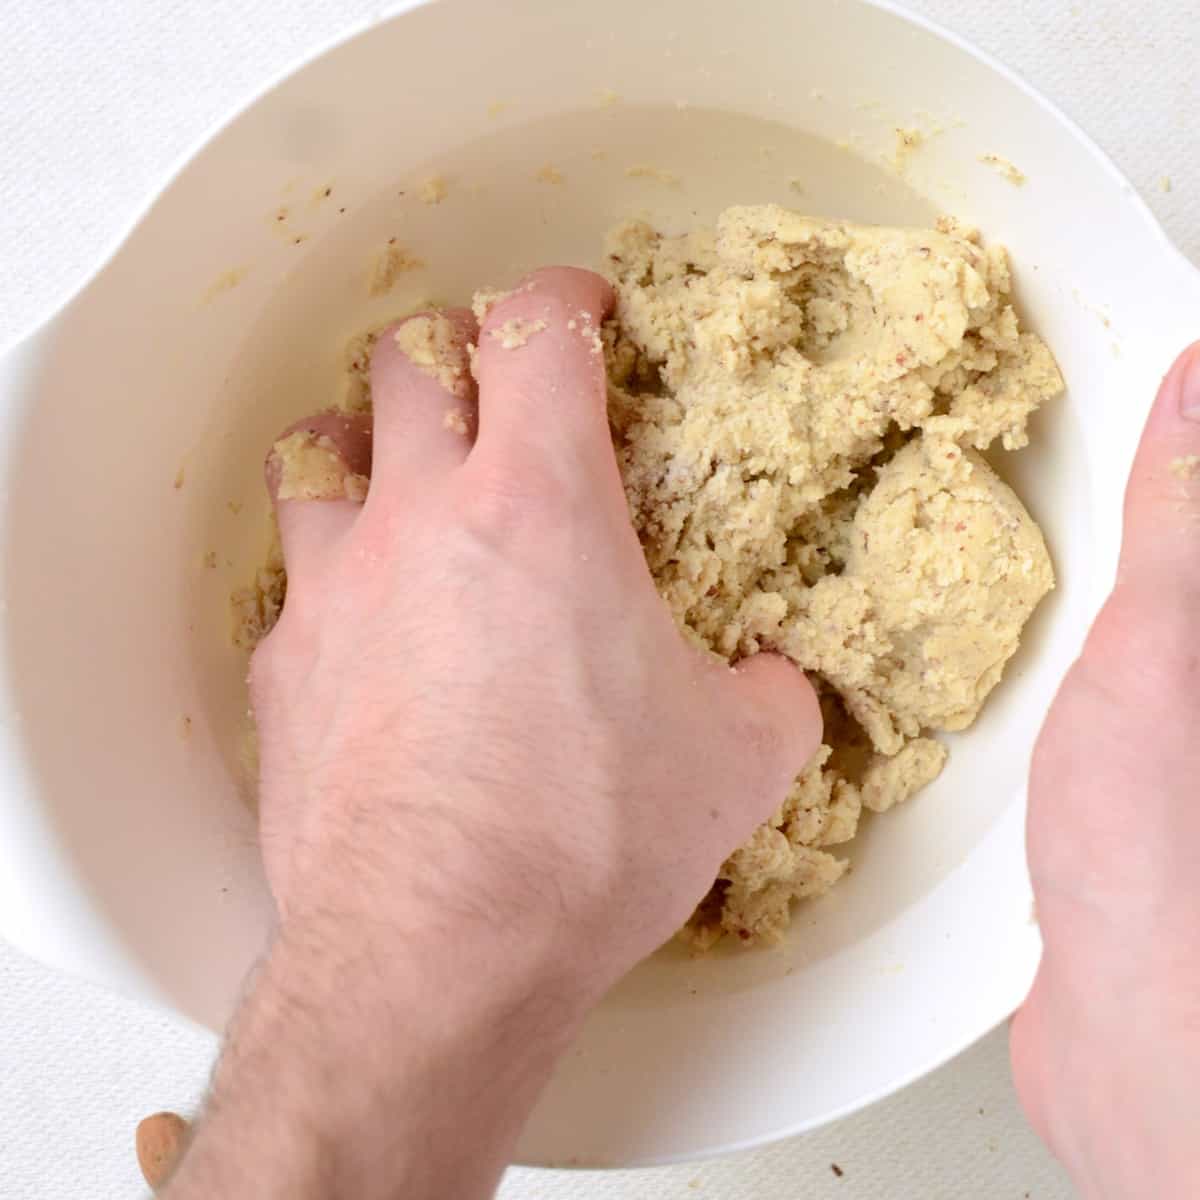 The dough ingredients are first mixed with a spoon or fork, and then kneaded by hand into a firm dough.